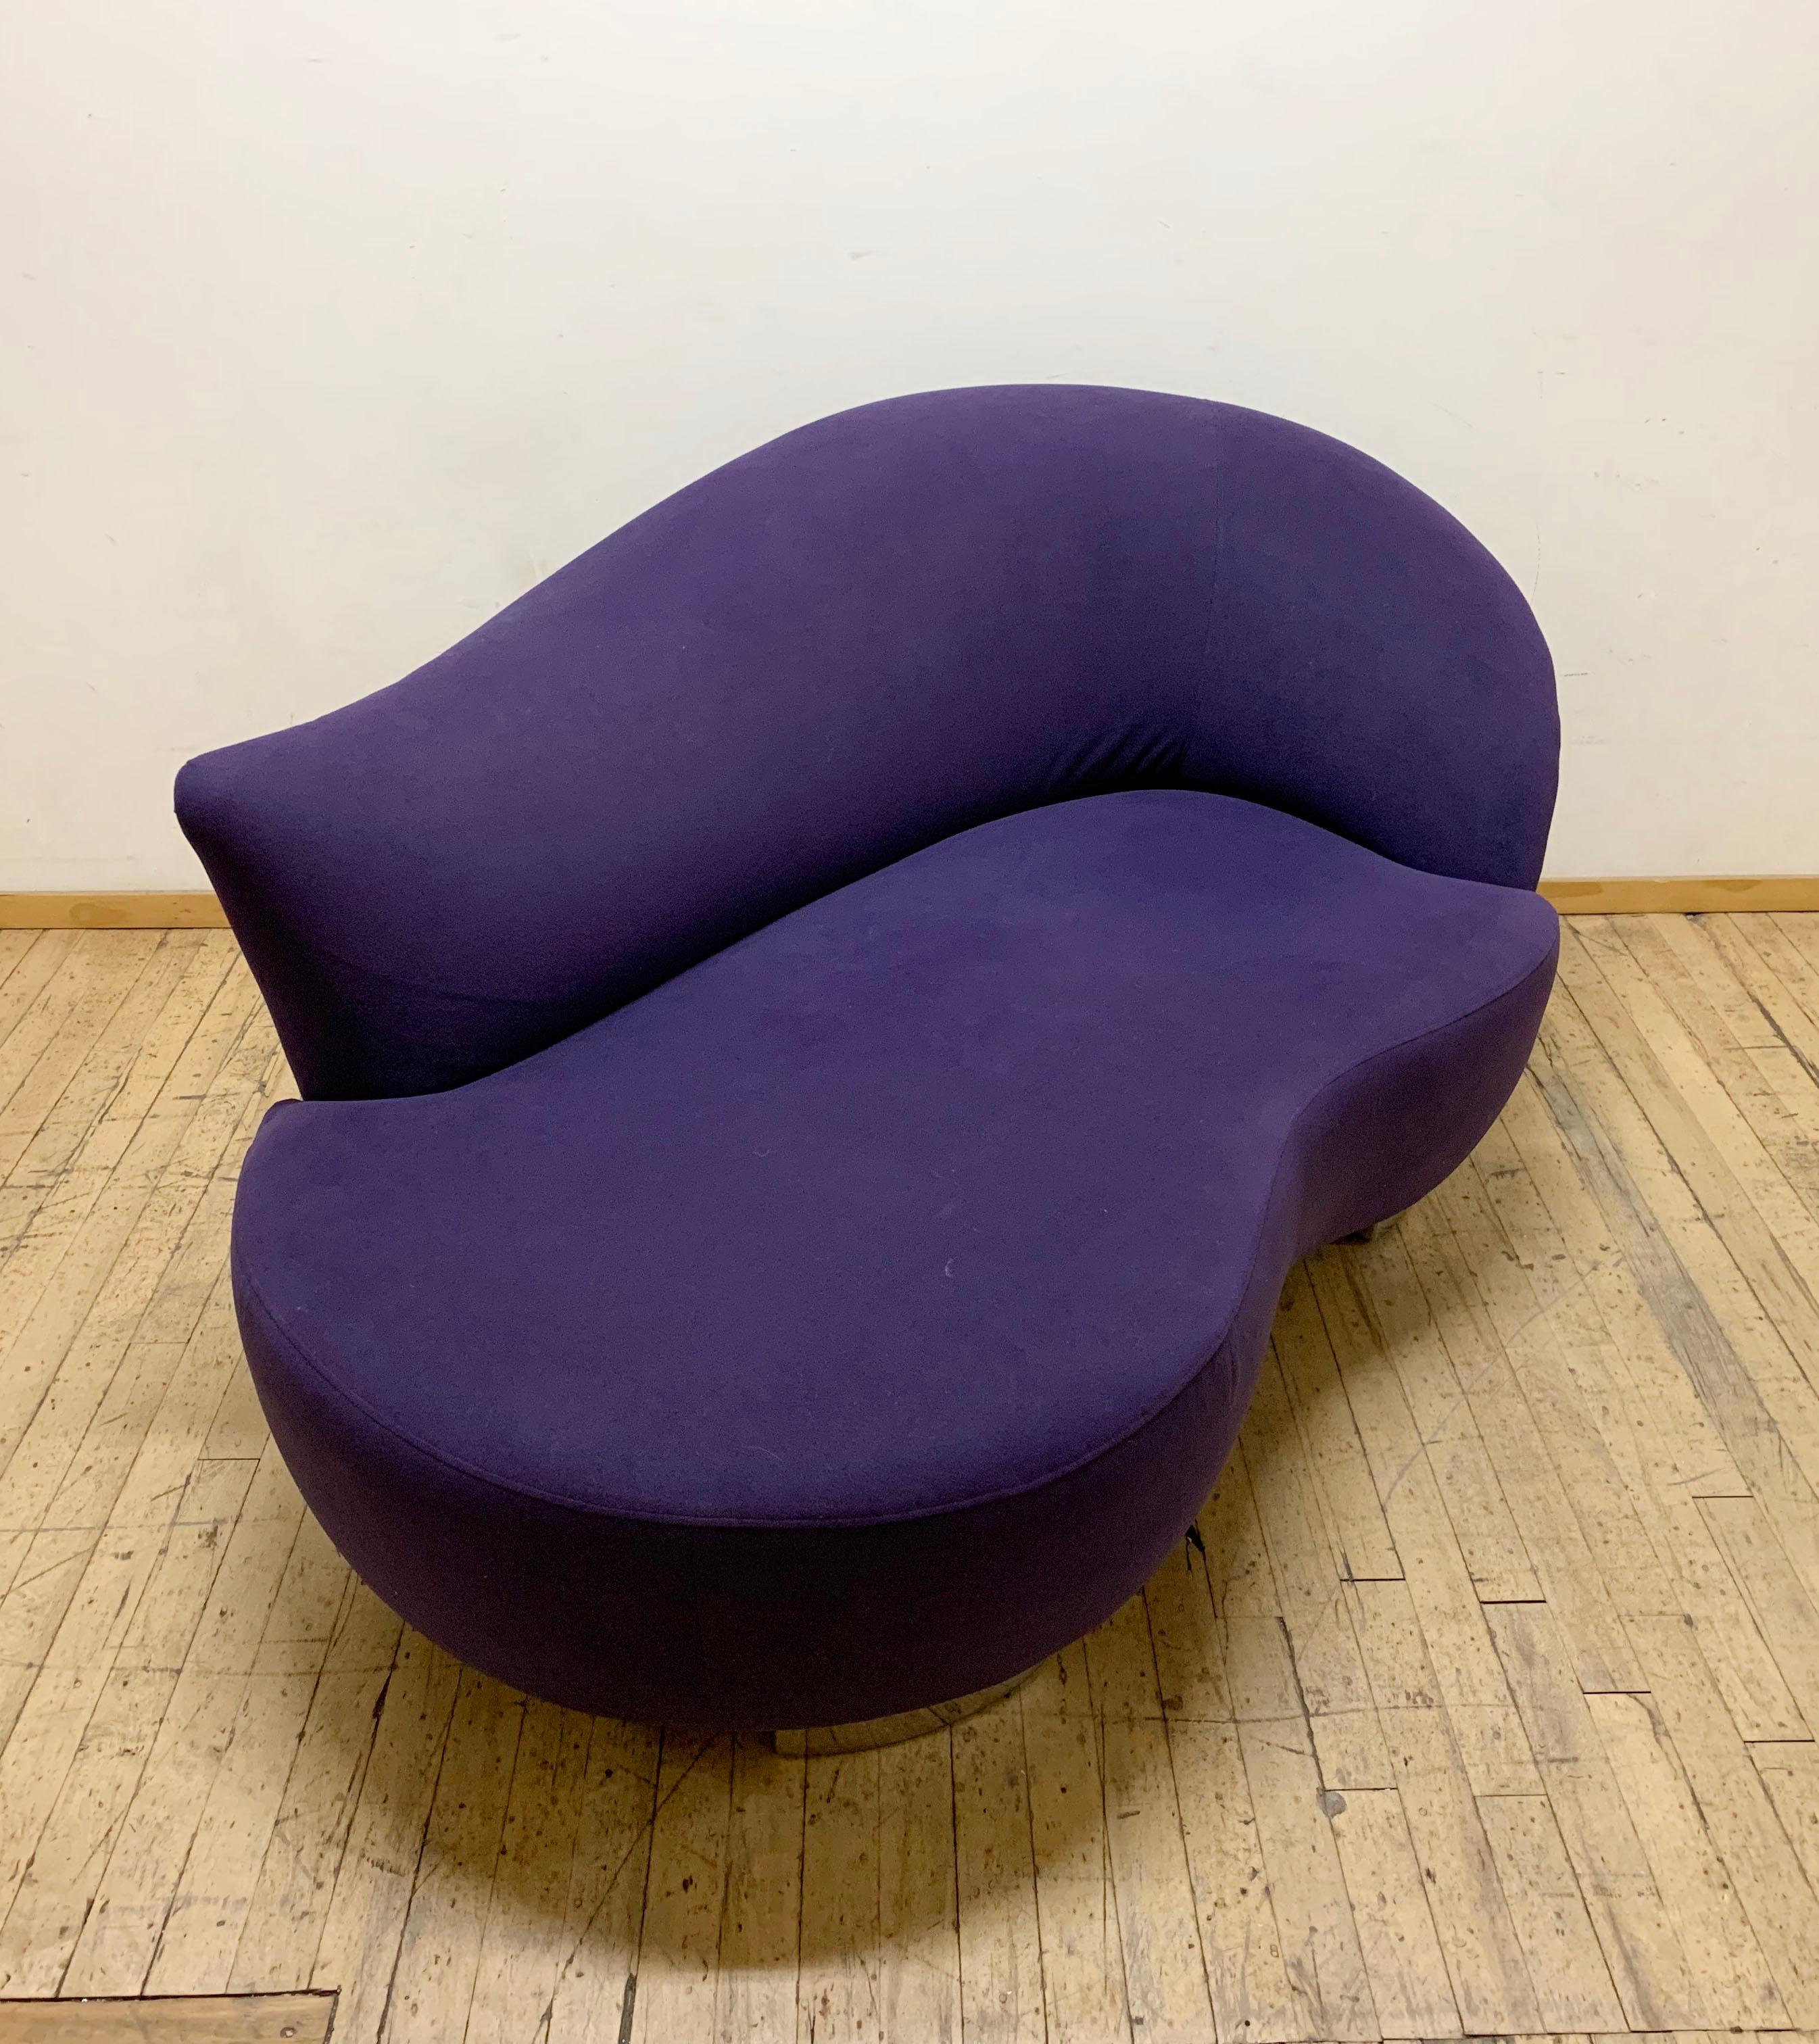 Vladimir Kagan chaise lounge sofa in its original purple upholstery. Design studio label still attached. Produced by either Directional or Weiman Preview Furniture.